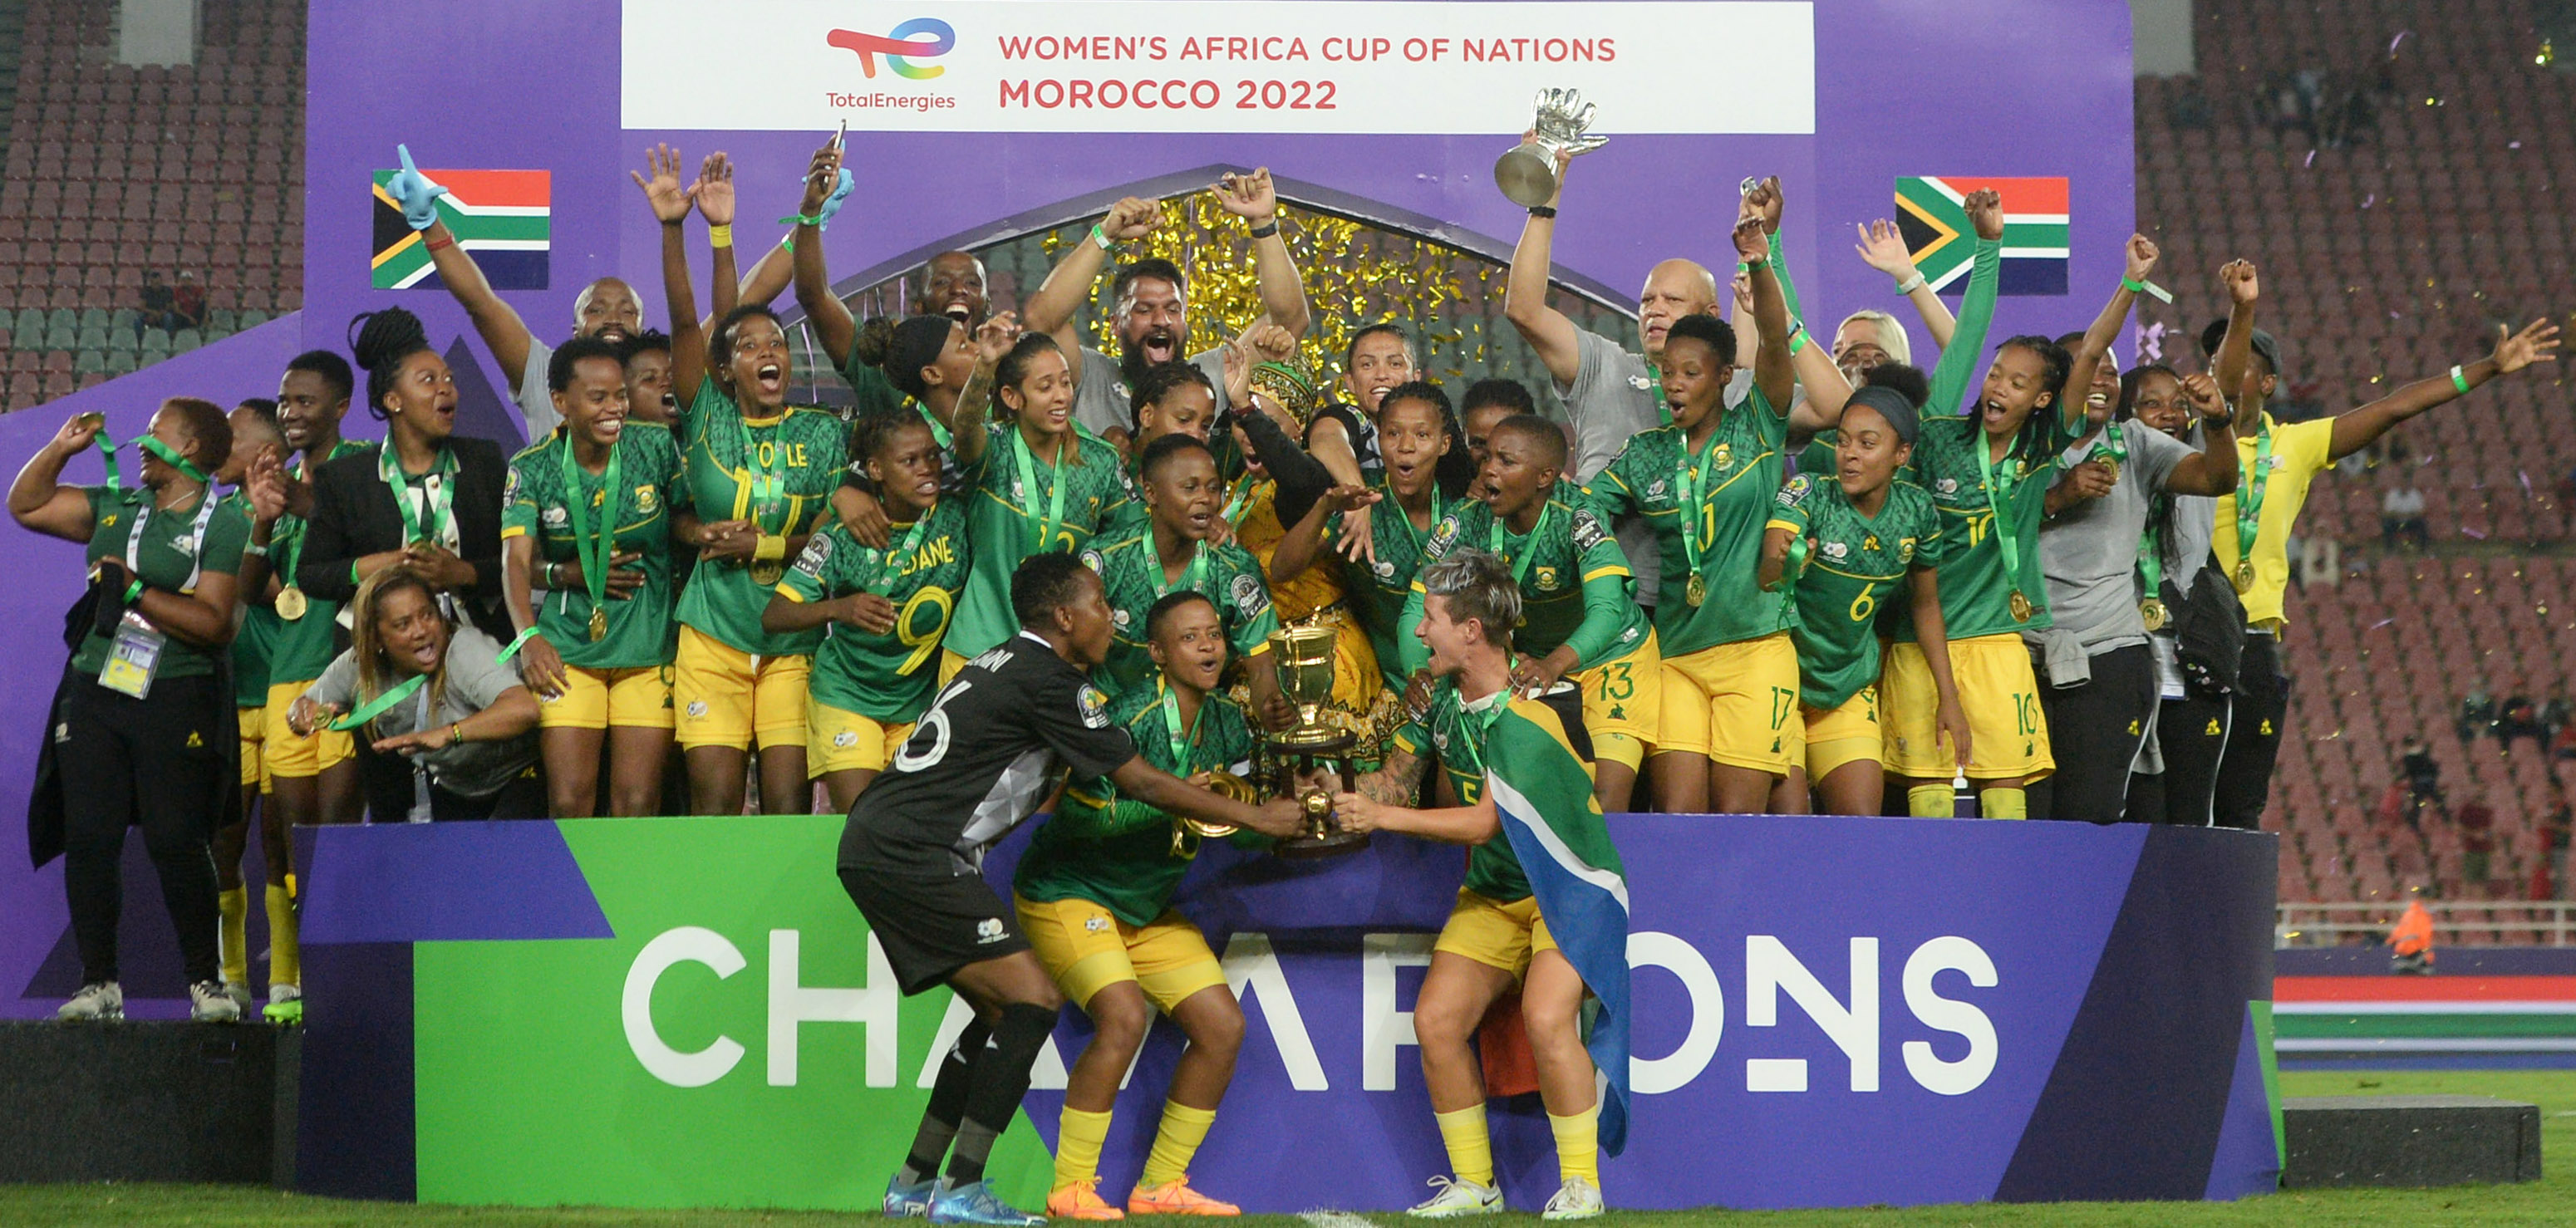 Banyana Banyana victory shows the sky is the limit for South Africa’s female footballers when properly resourced